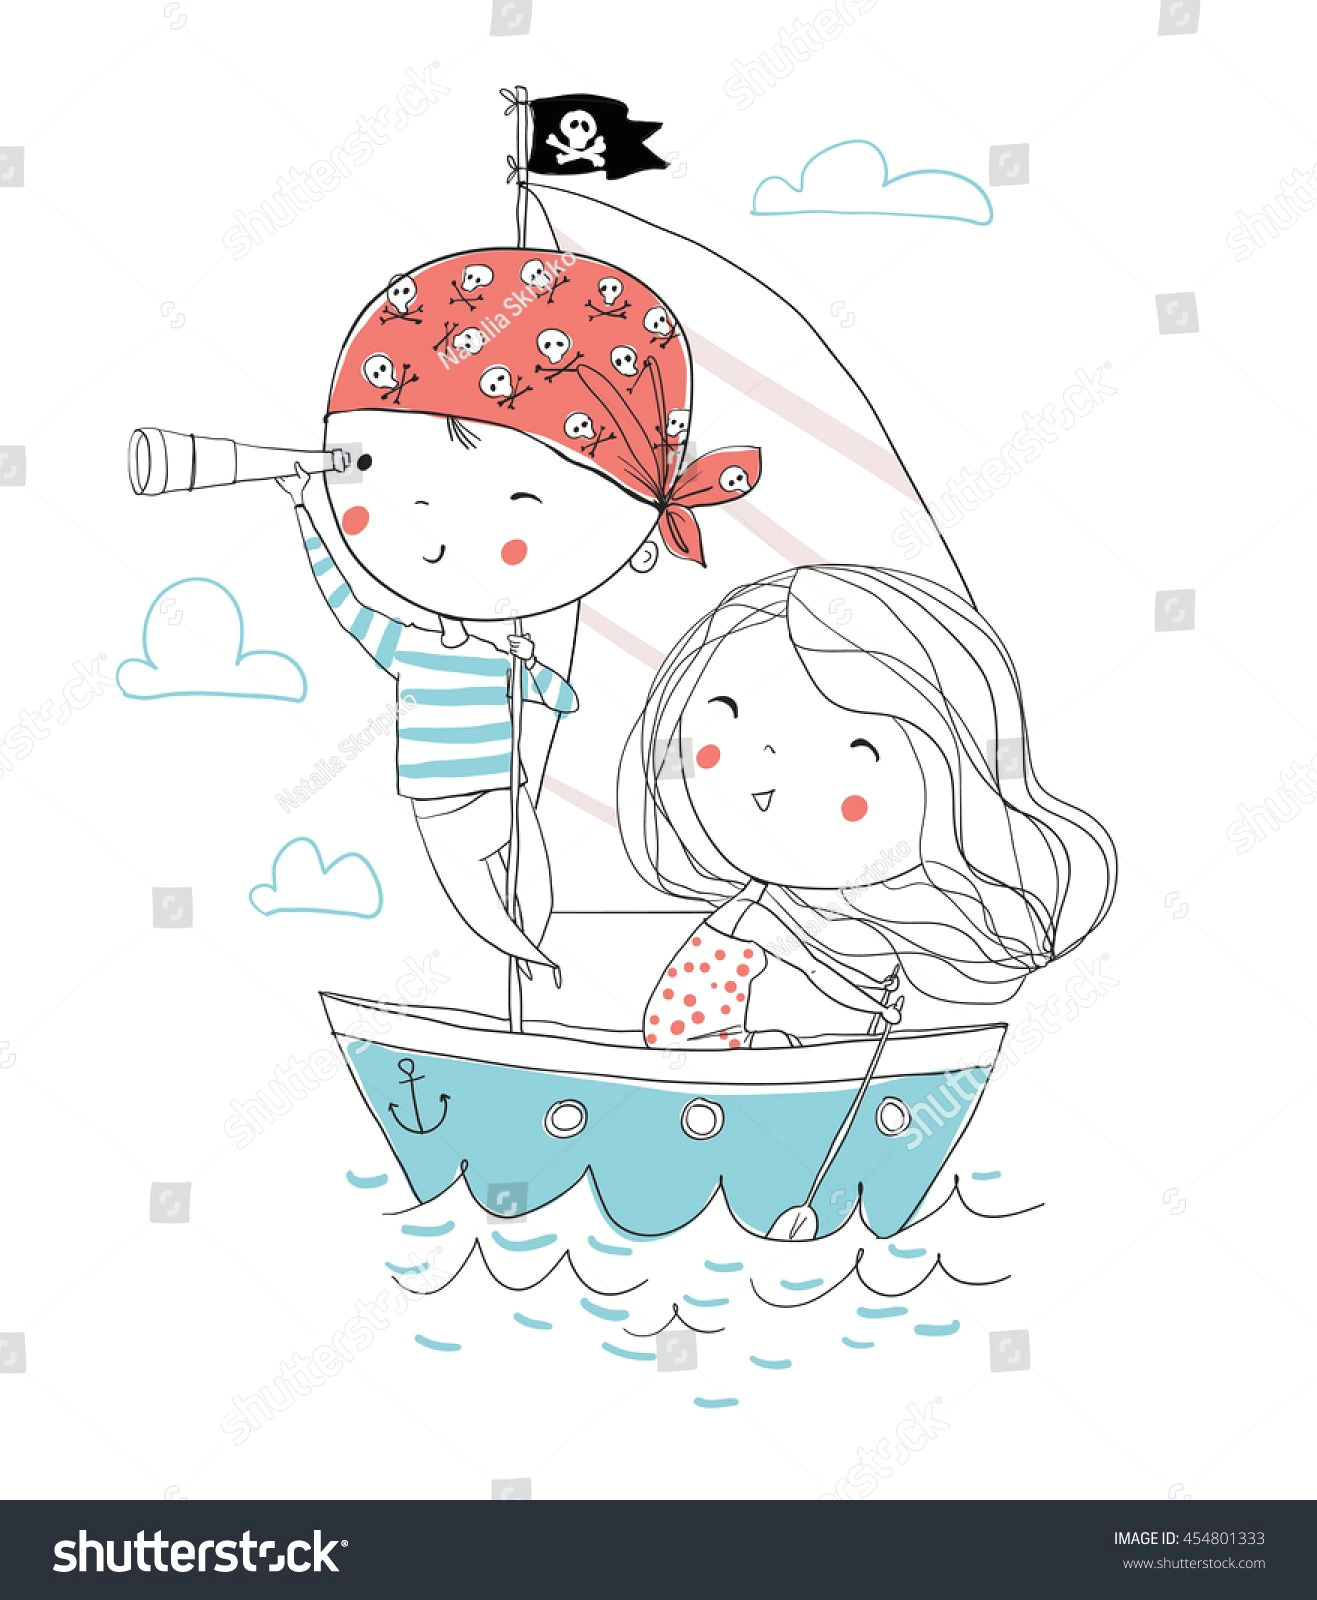 Cartoon Drawing Of A Yacht Pirate Boy and Girl In Boat to Sea My Style Art Doodles